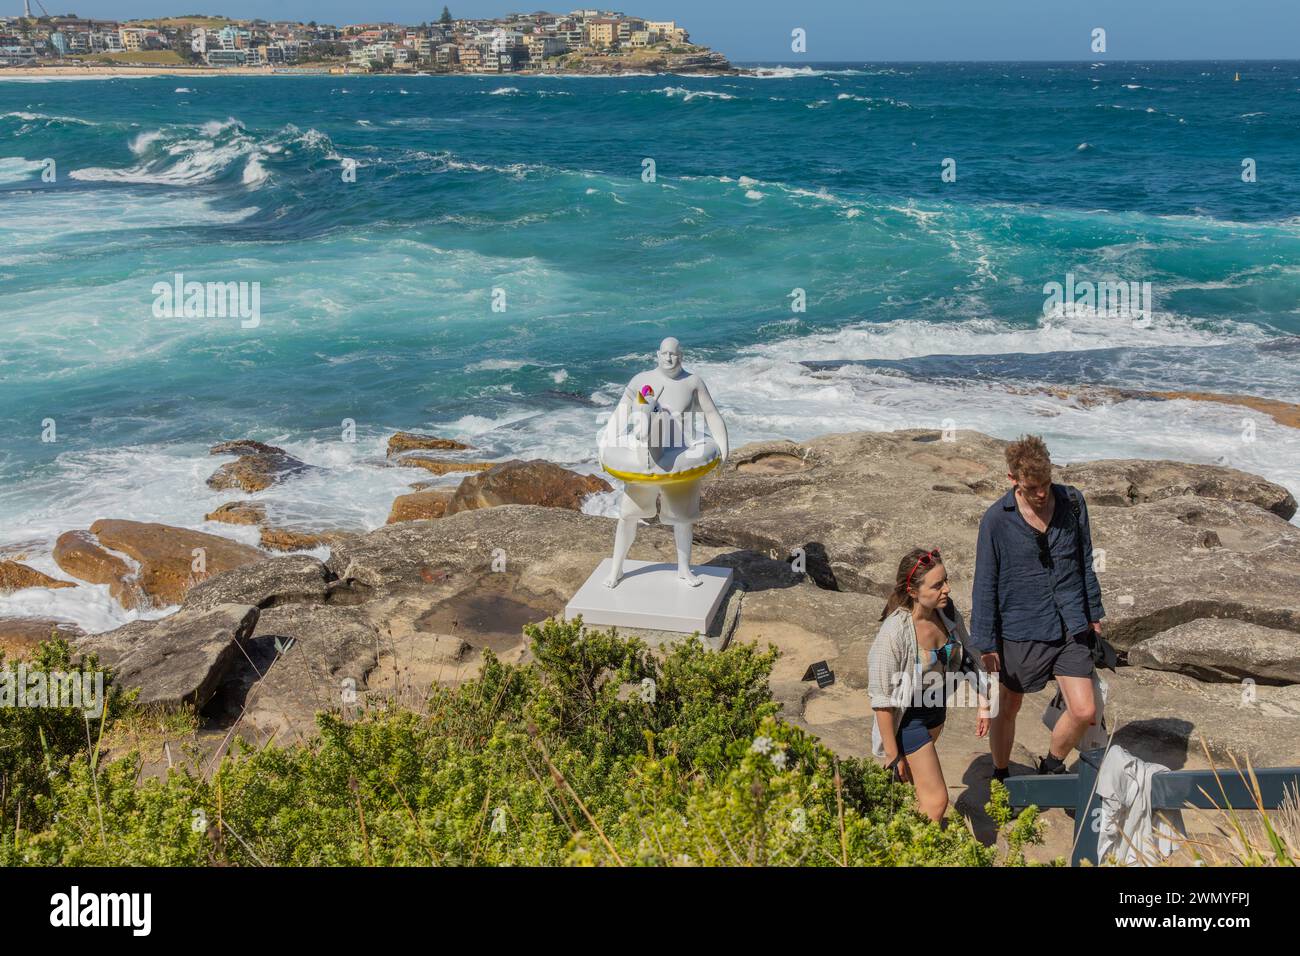 Visitors stroll past 'David' by Coady, part of the 'Sculpture by the Sea' exhibit on the coastal walk between Bondi and Tamarama beaches. Stock Photo